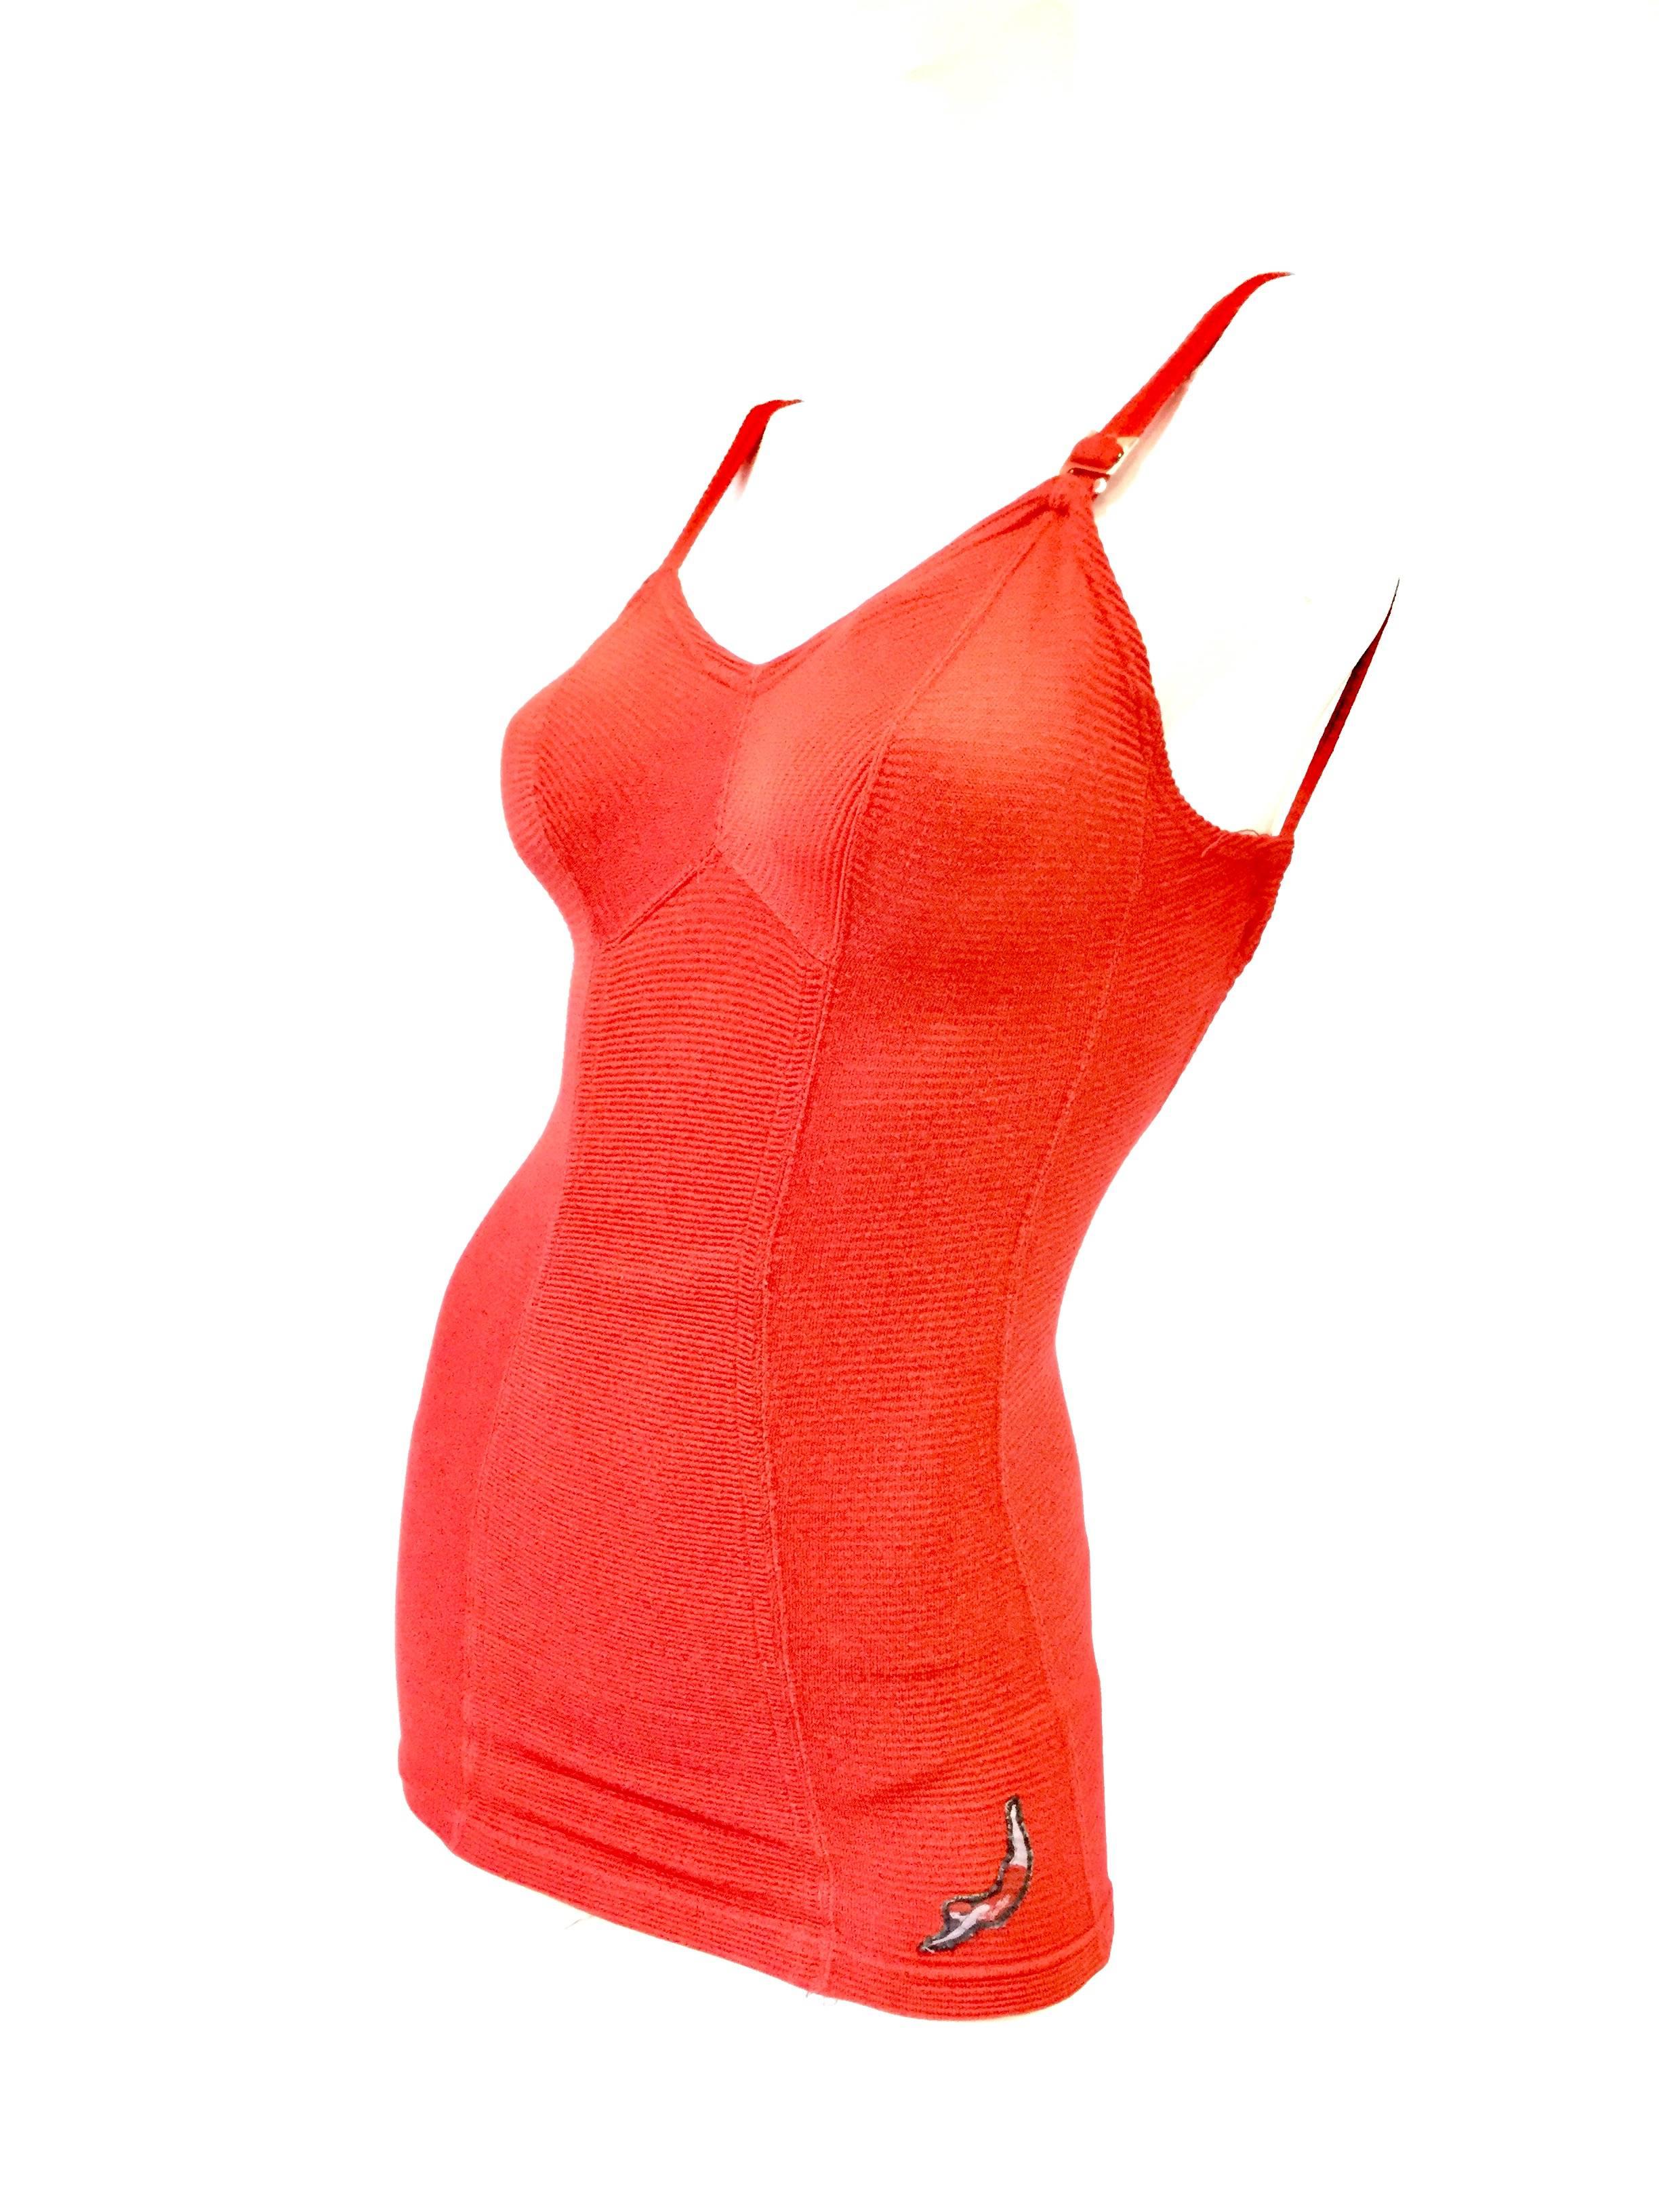 
Gorgeous red bombshell swimsuit by Jantzen! This one piece rib knit pattern suit is composed of several panels arranged in a flattering combination that emphasizes the wearer’s waist. The suit, with its long and fitted attached top resembles a